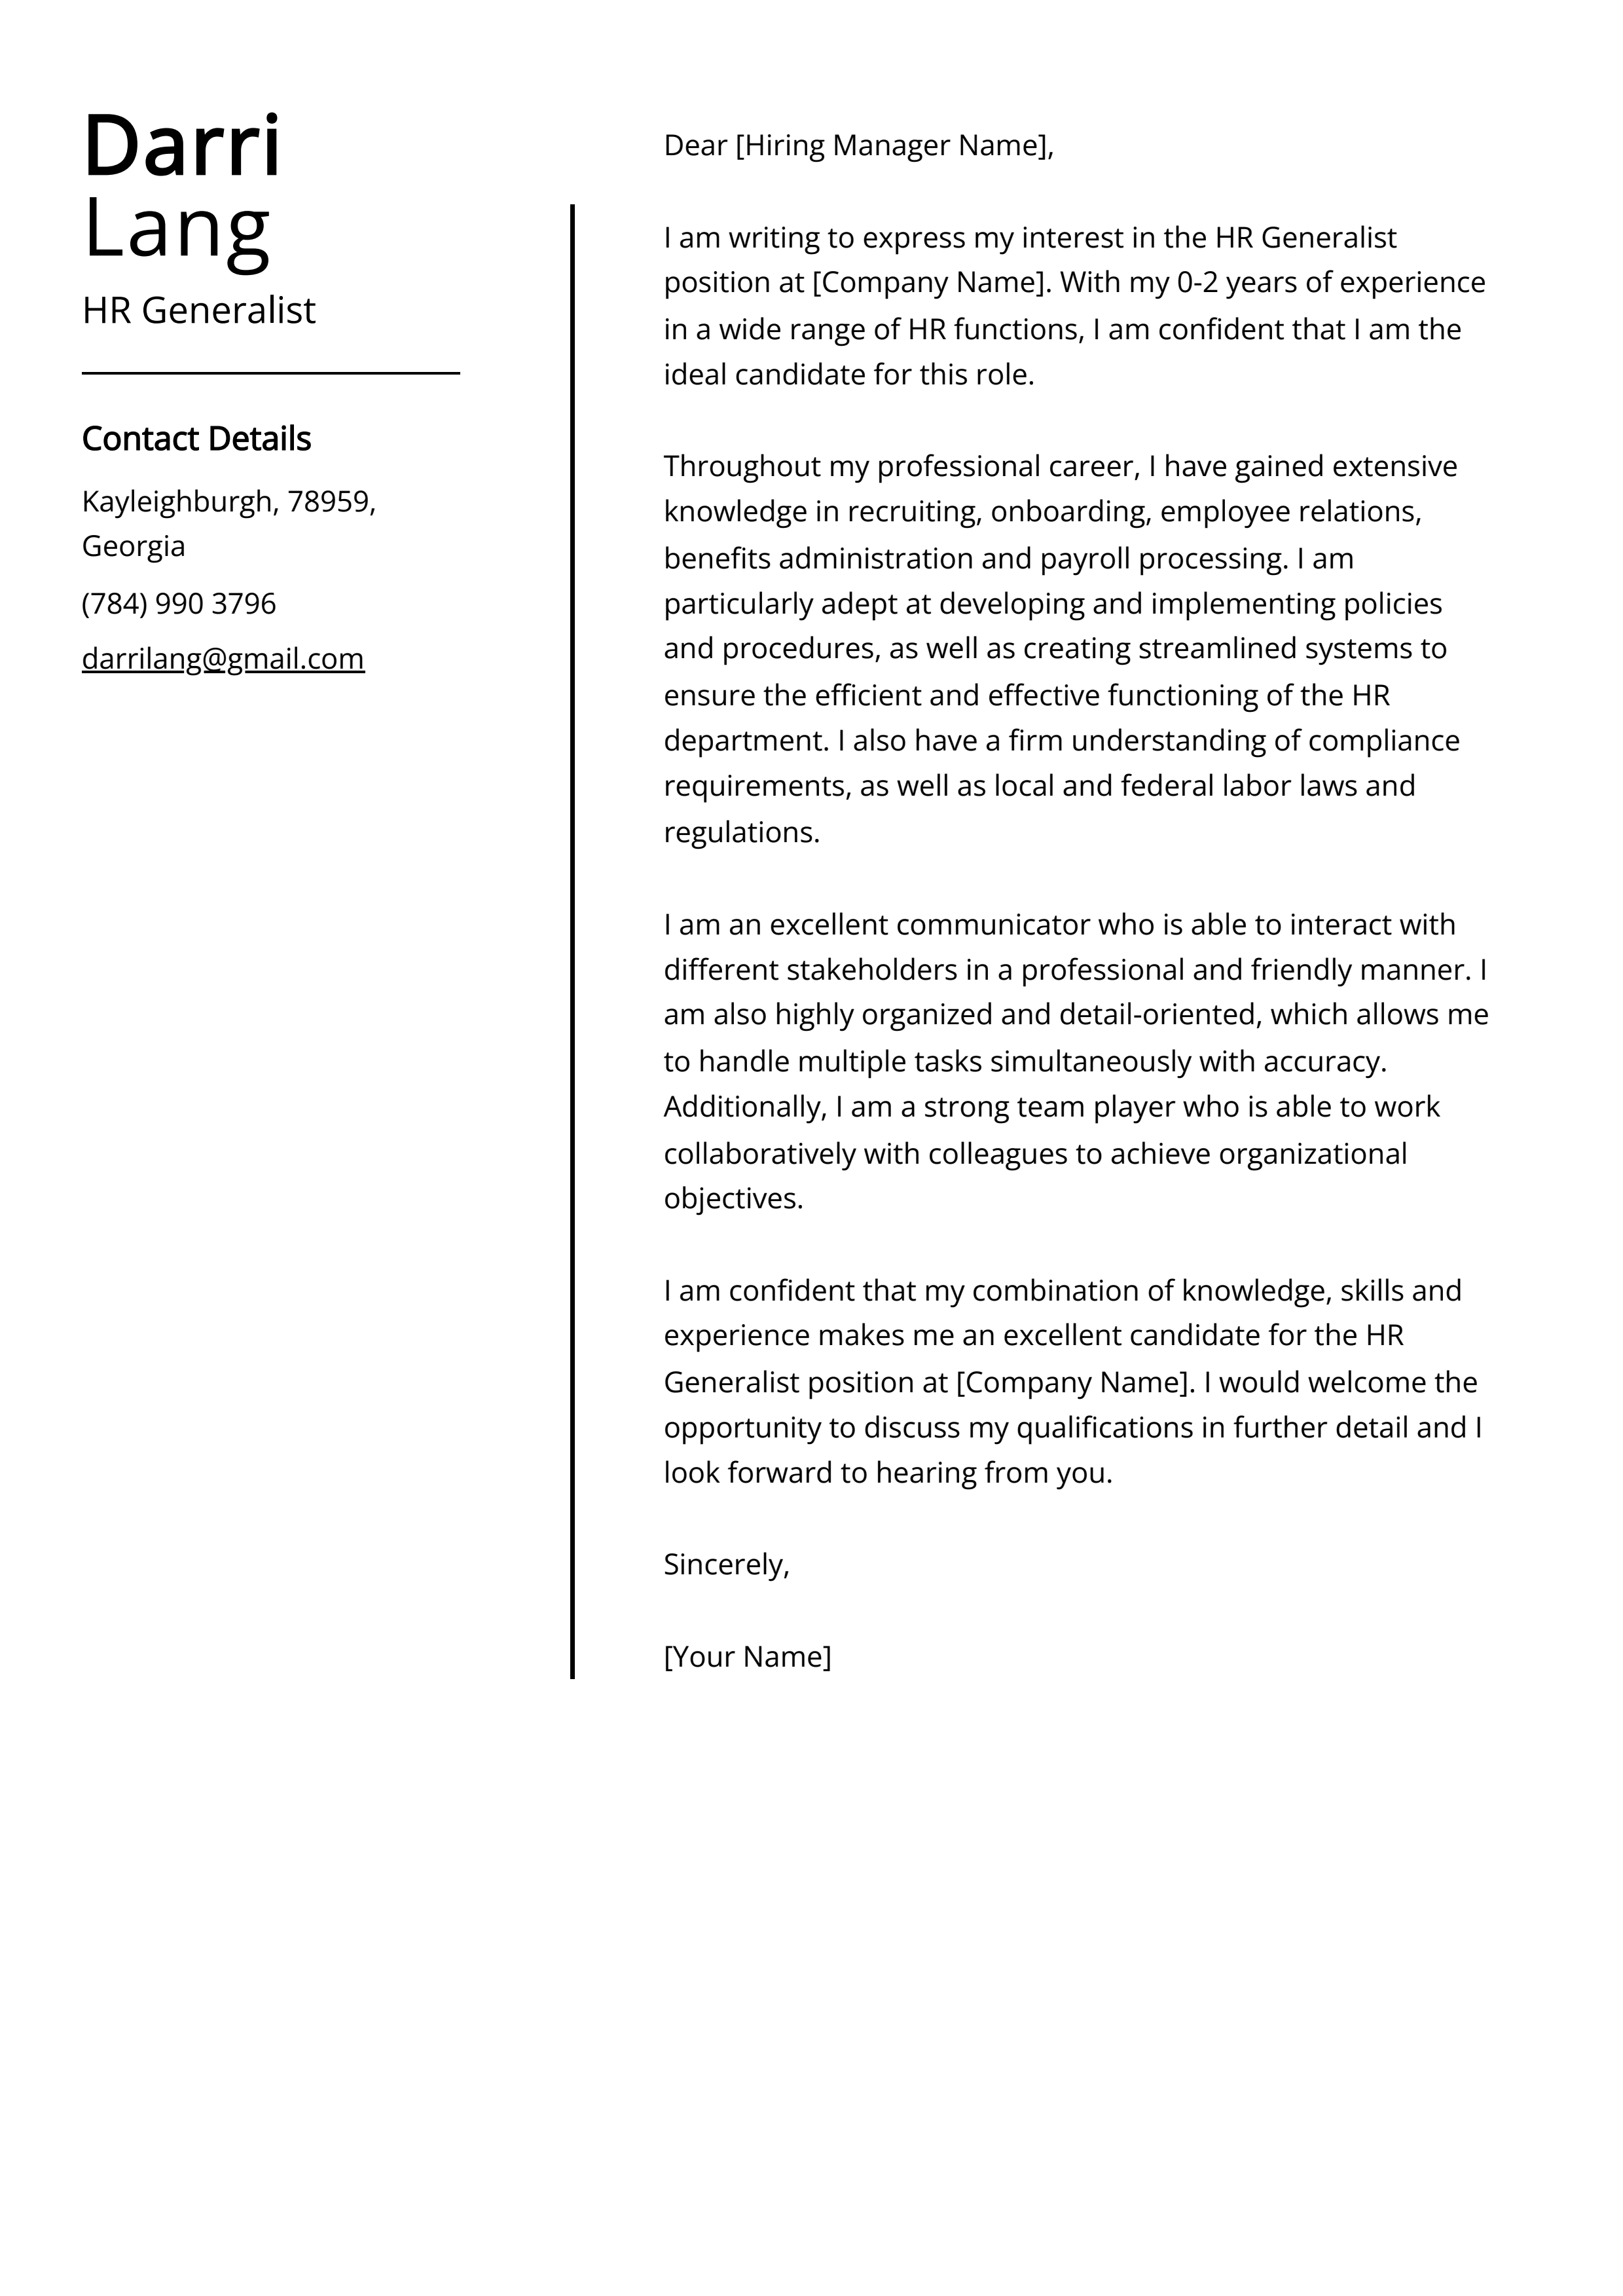 HR Generalist Cover Letter Example